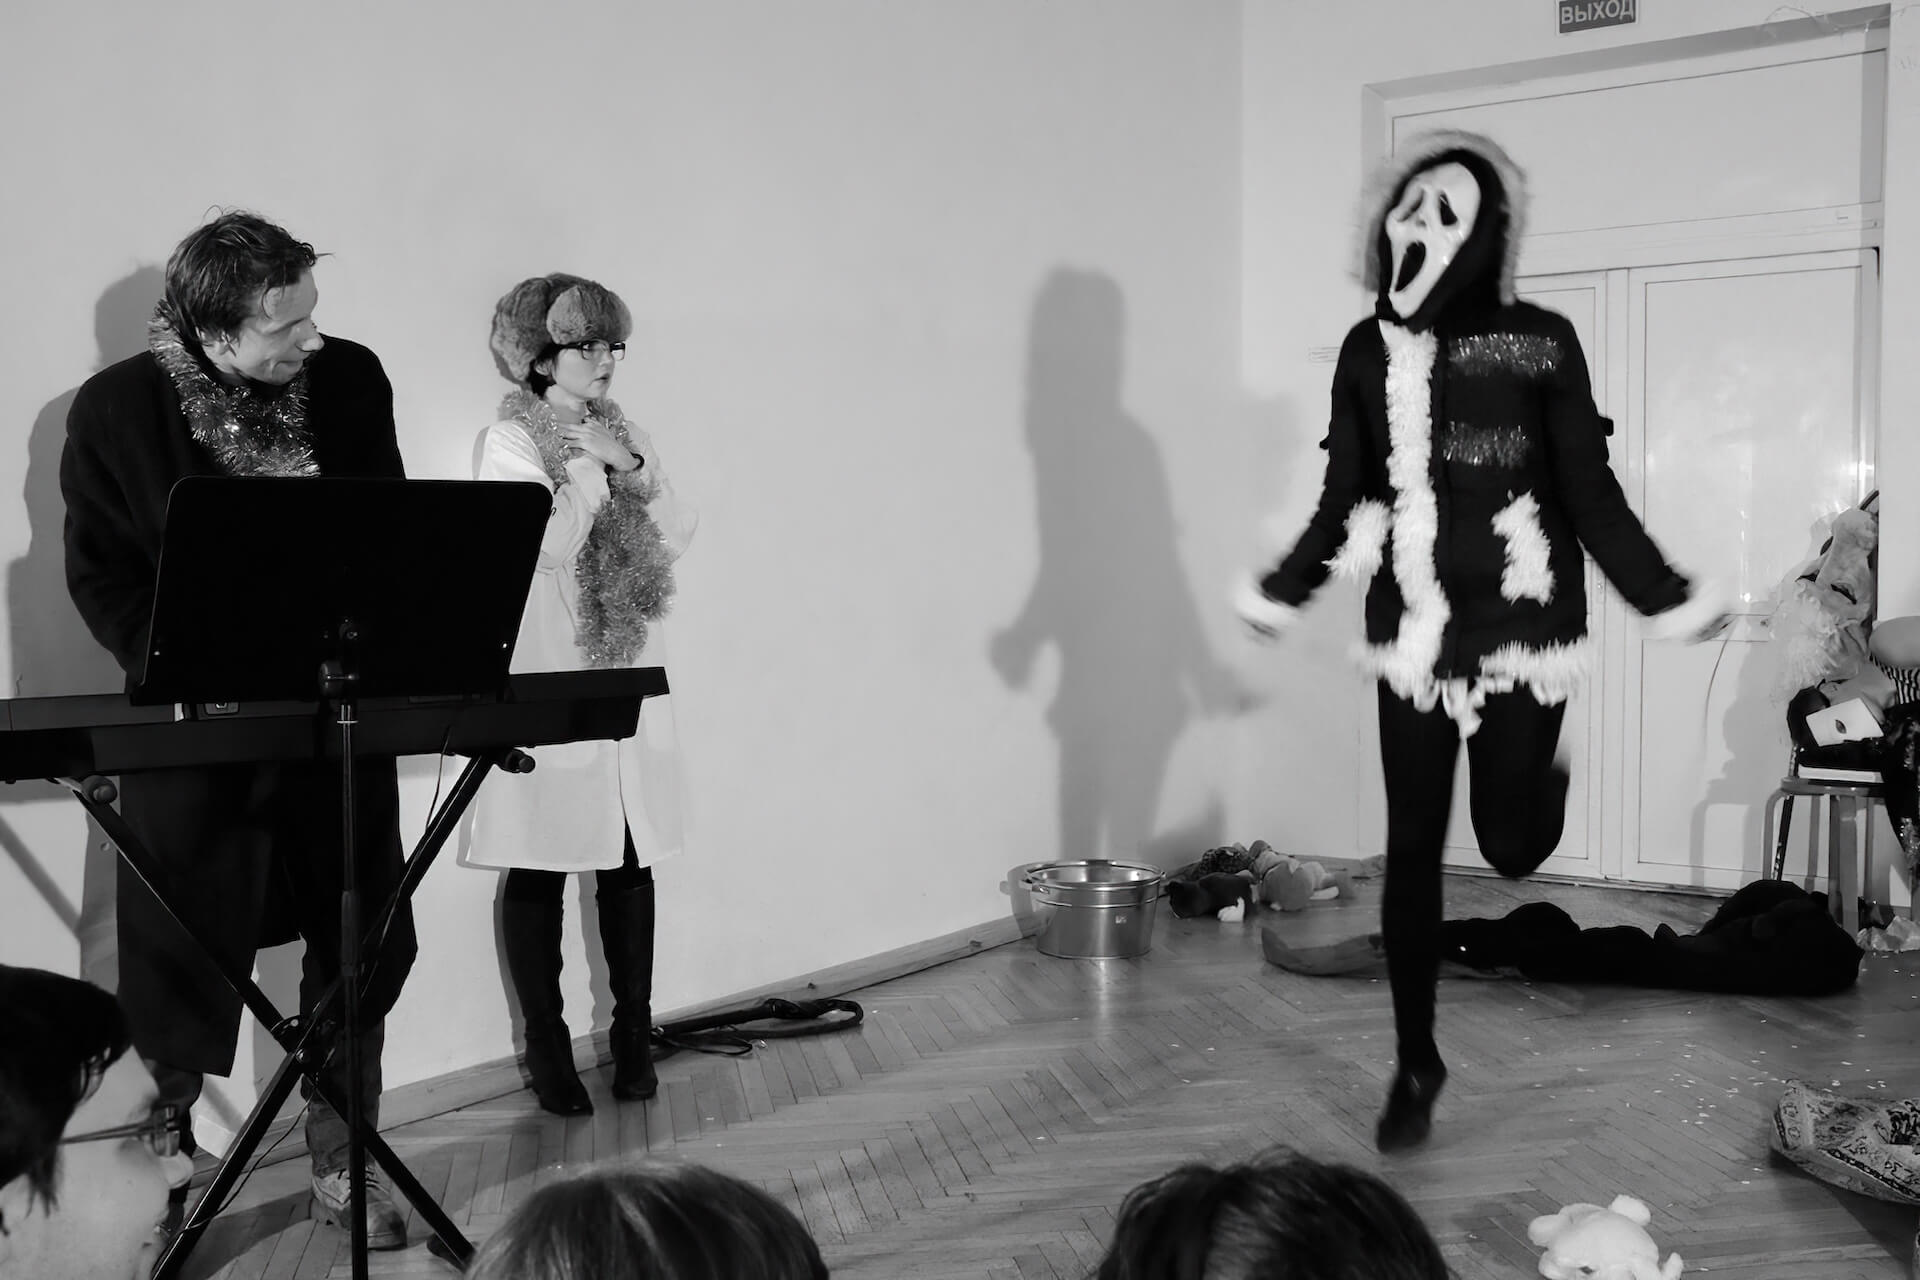 Black and white image of a performer in screaming mask with a father christmas clothing jumping. There is another performer on the side playing keyboard to it.